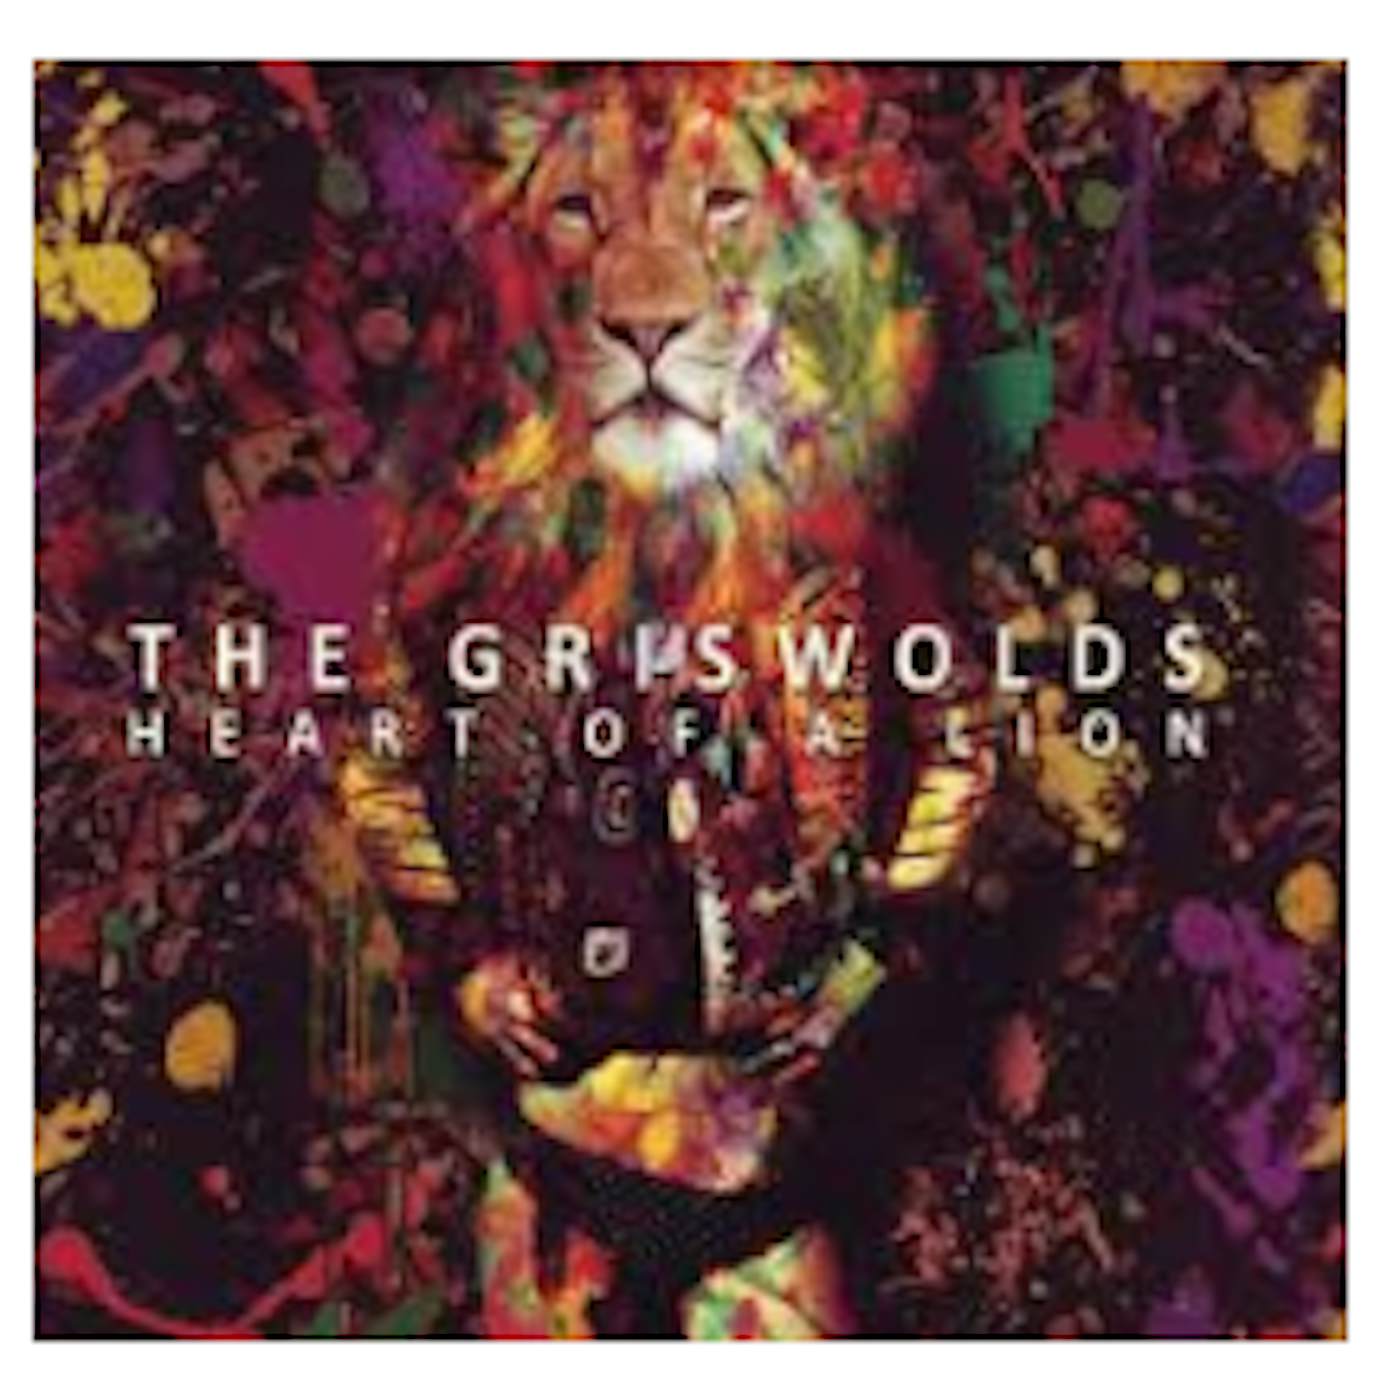 The Griswolds - Heart of a Lion EP (Vinyl)